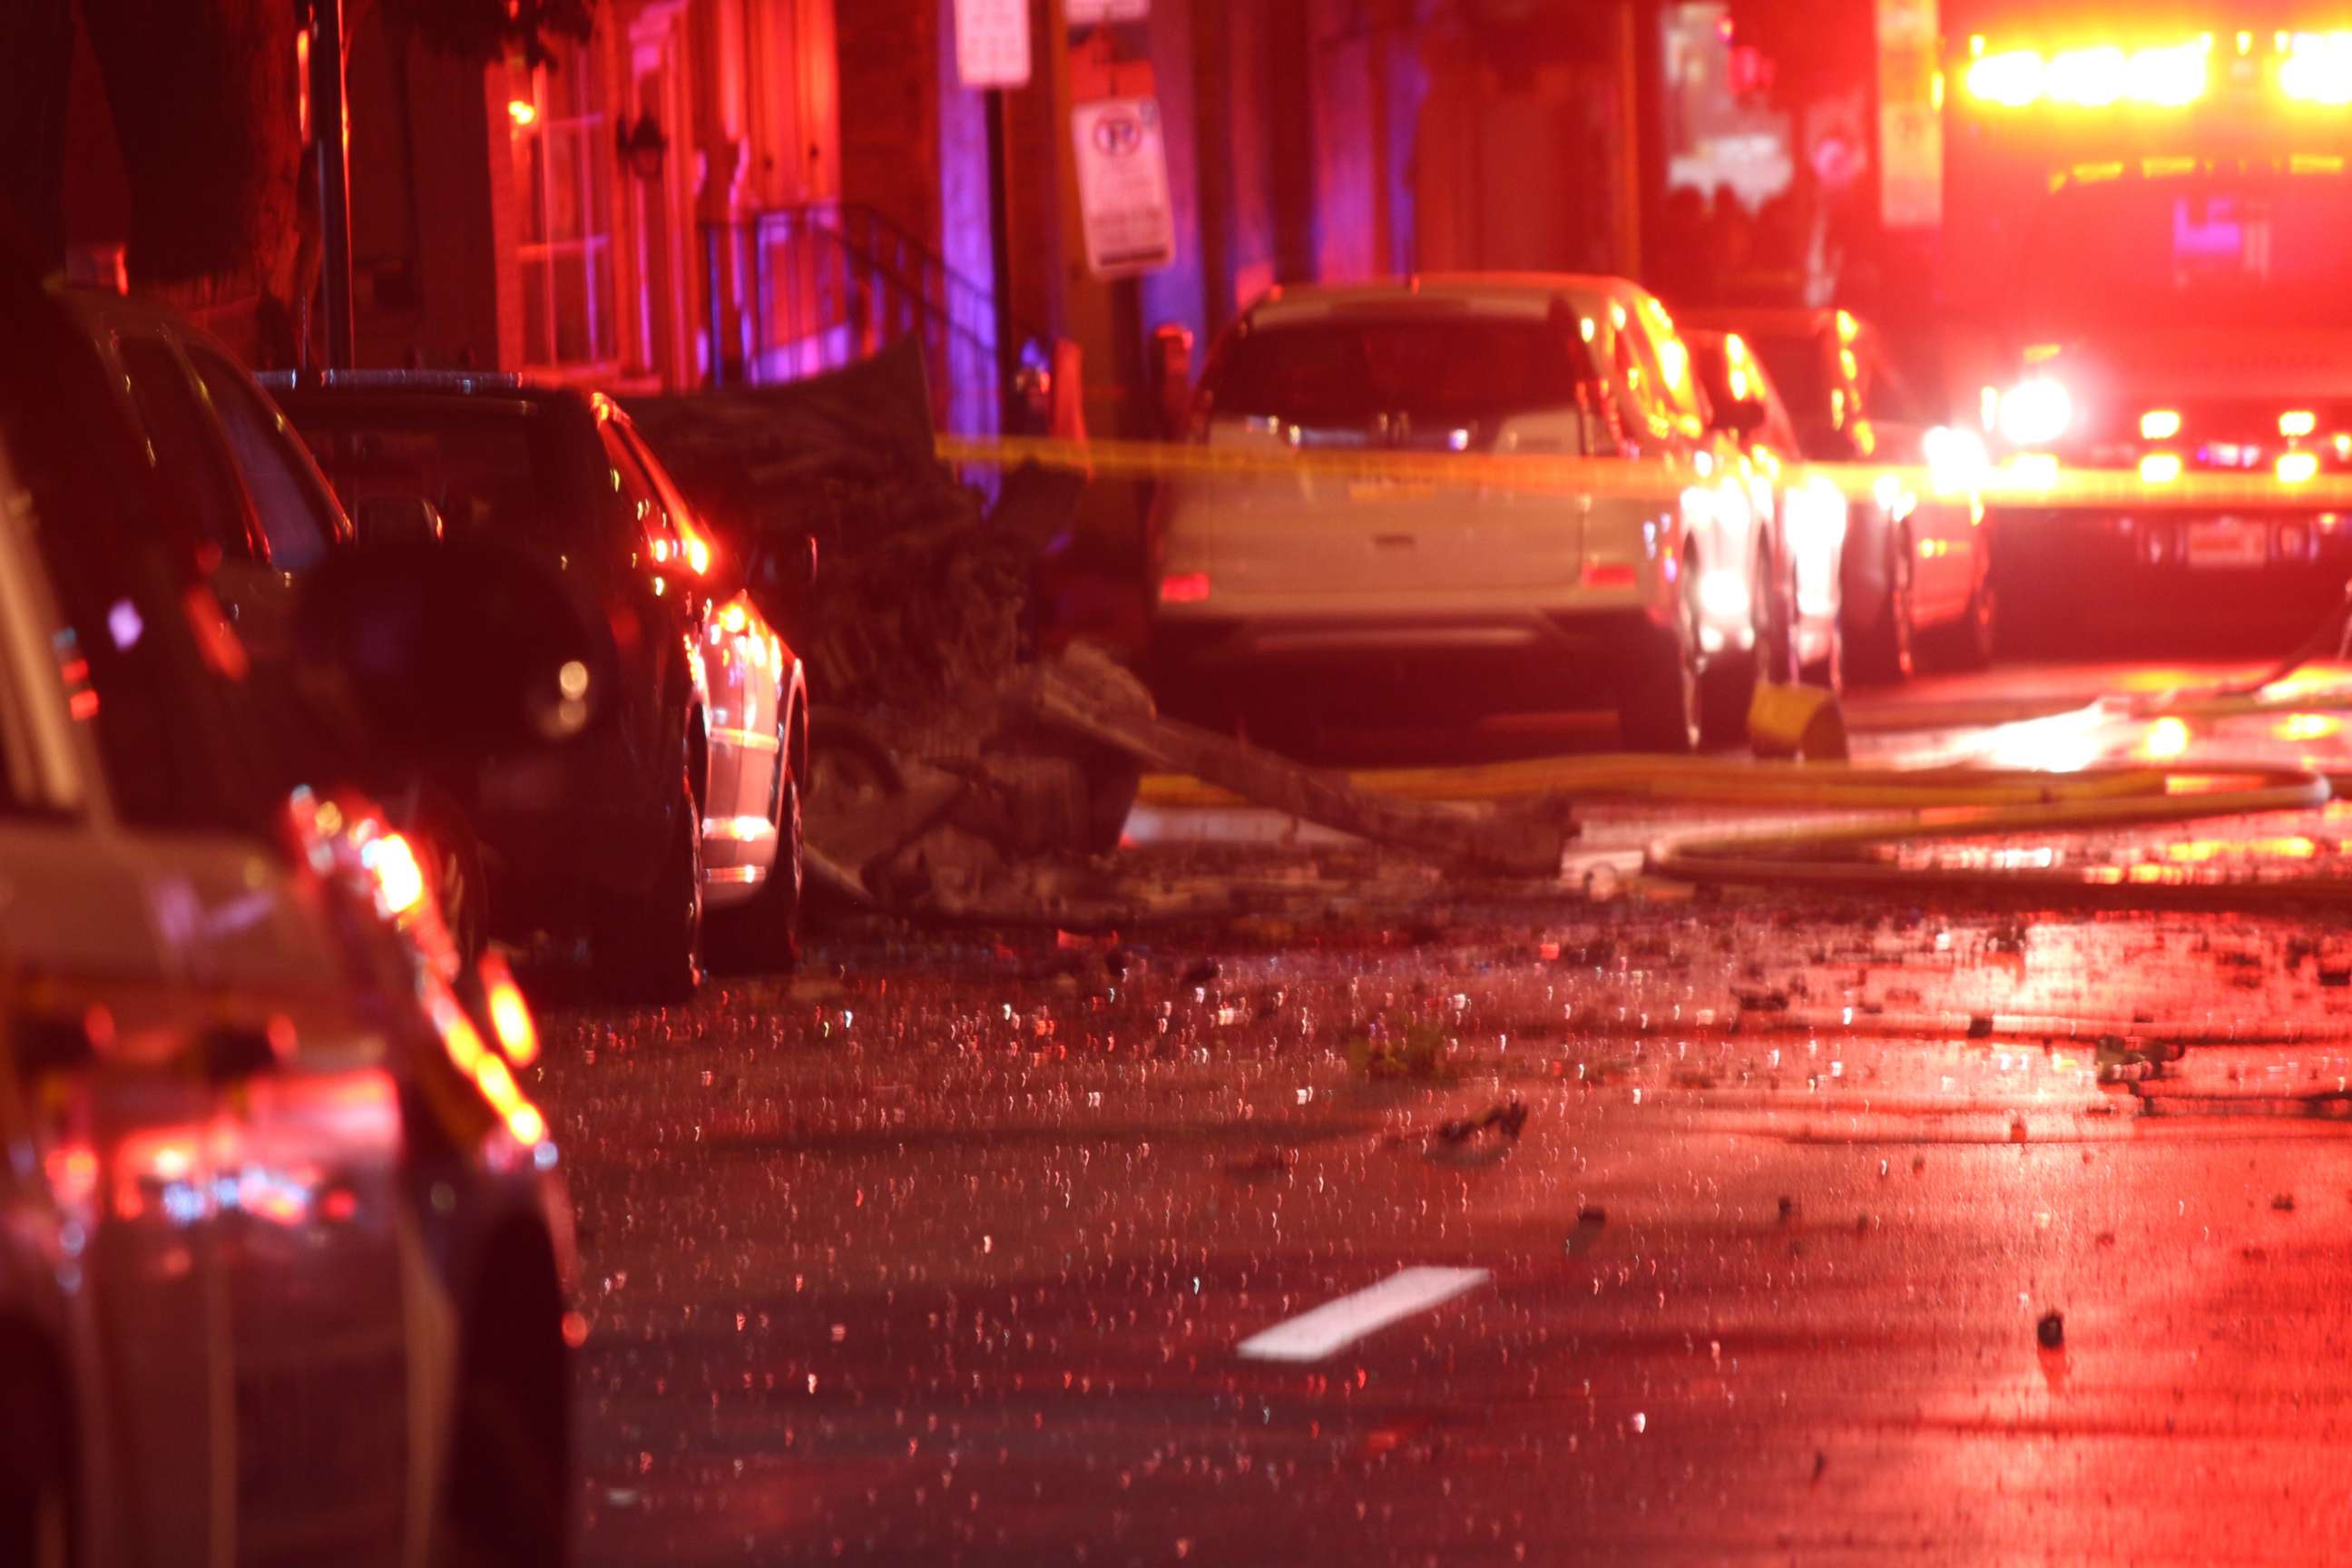 PHOTO: A deadly car explosion rattled a neighborhood in Allentown, Pa., on Friday, Sept. 29, 2018.